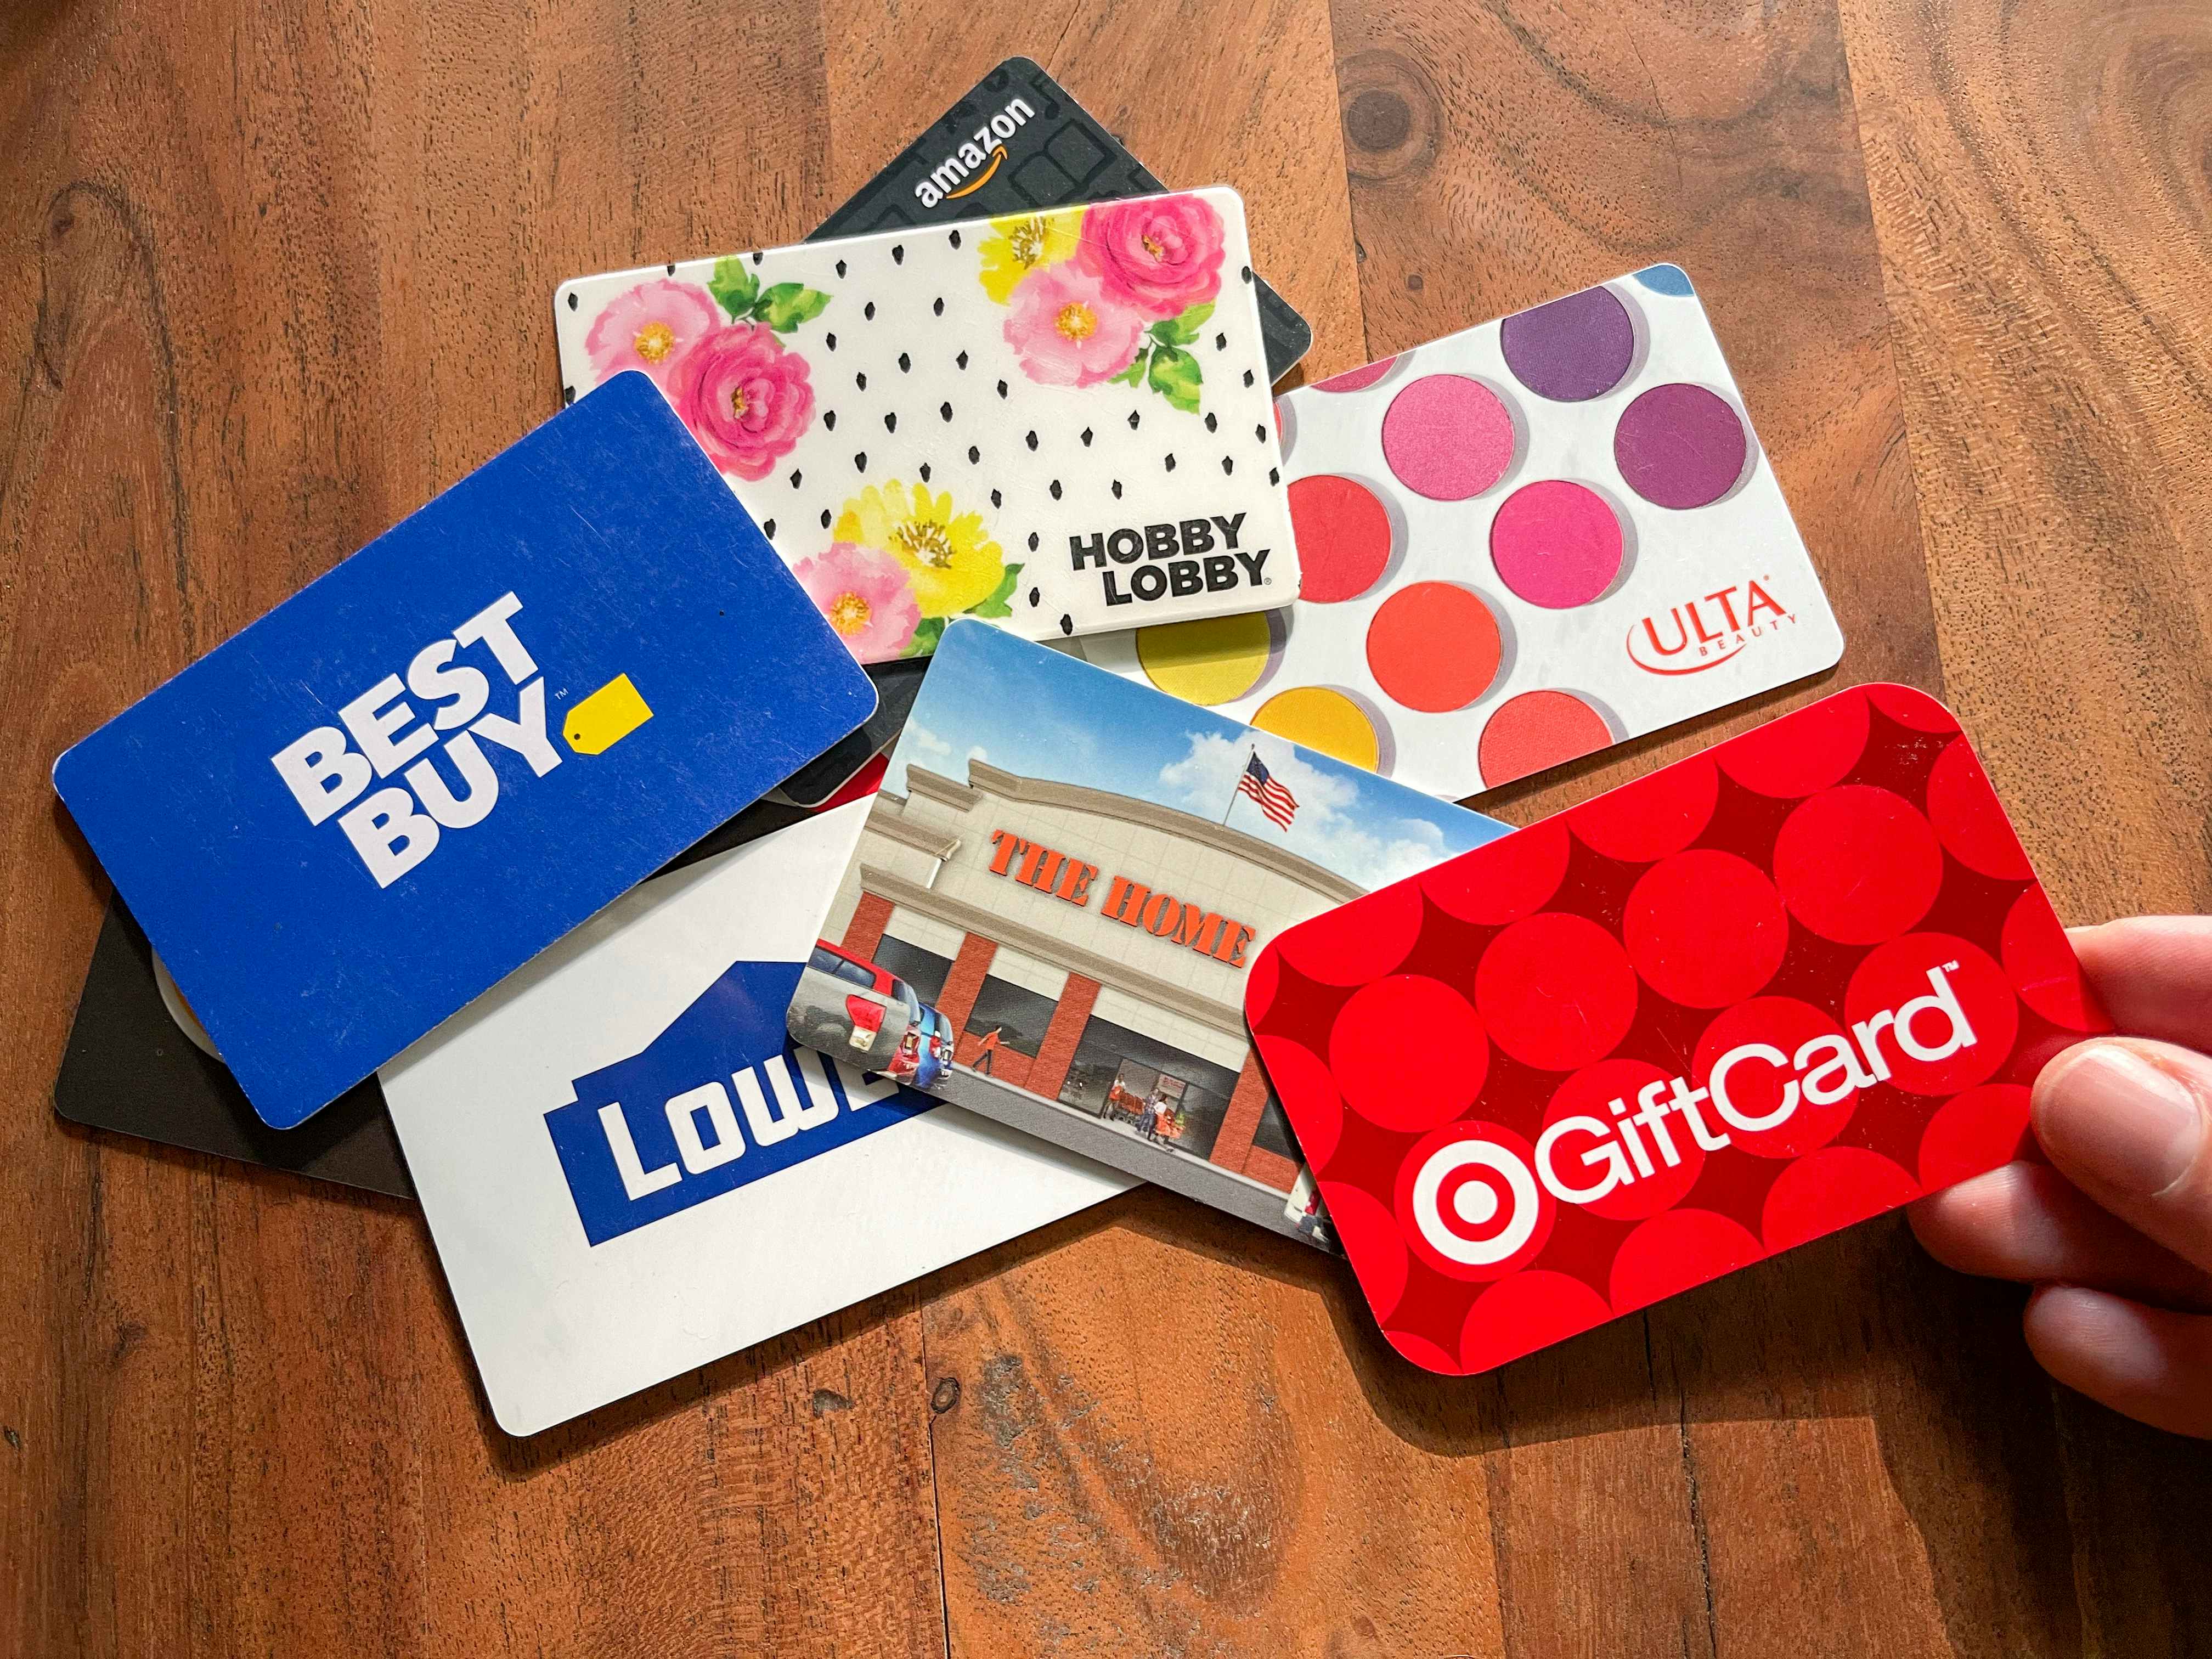 A person holding a target gift card with a bunch of other gift cards on the table behind it.